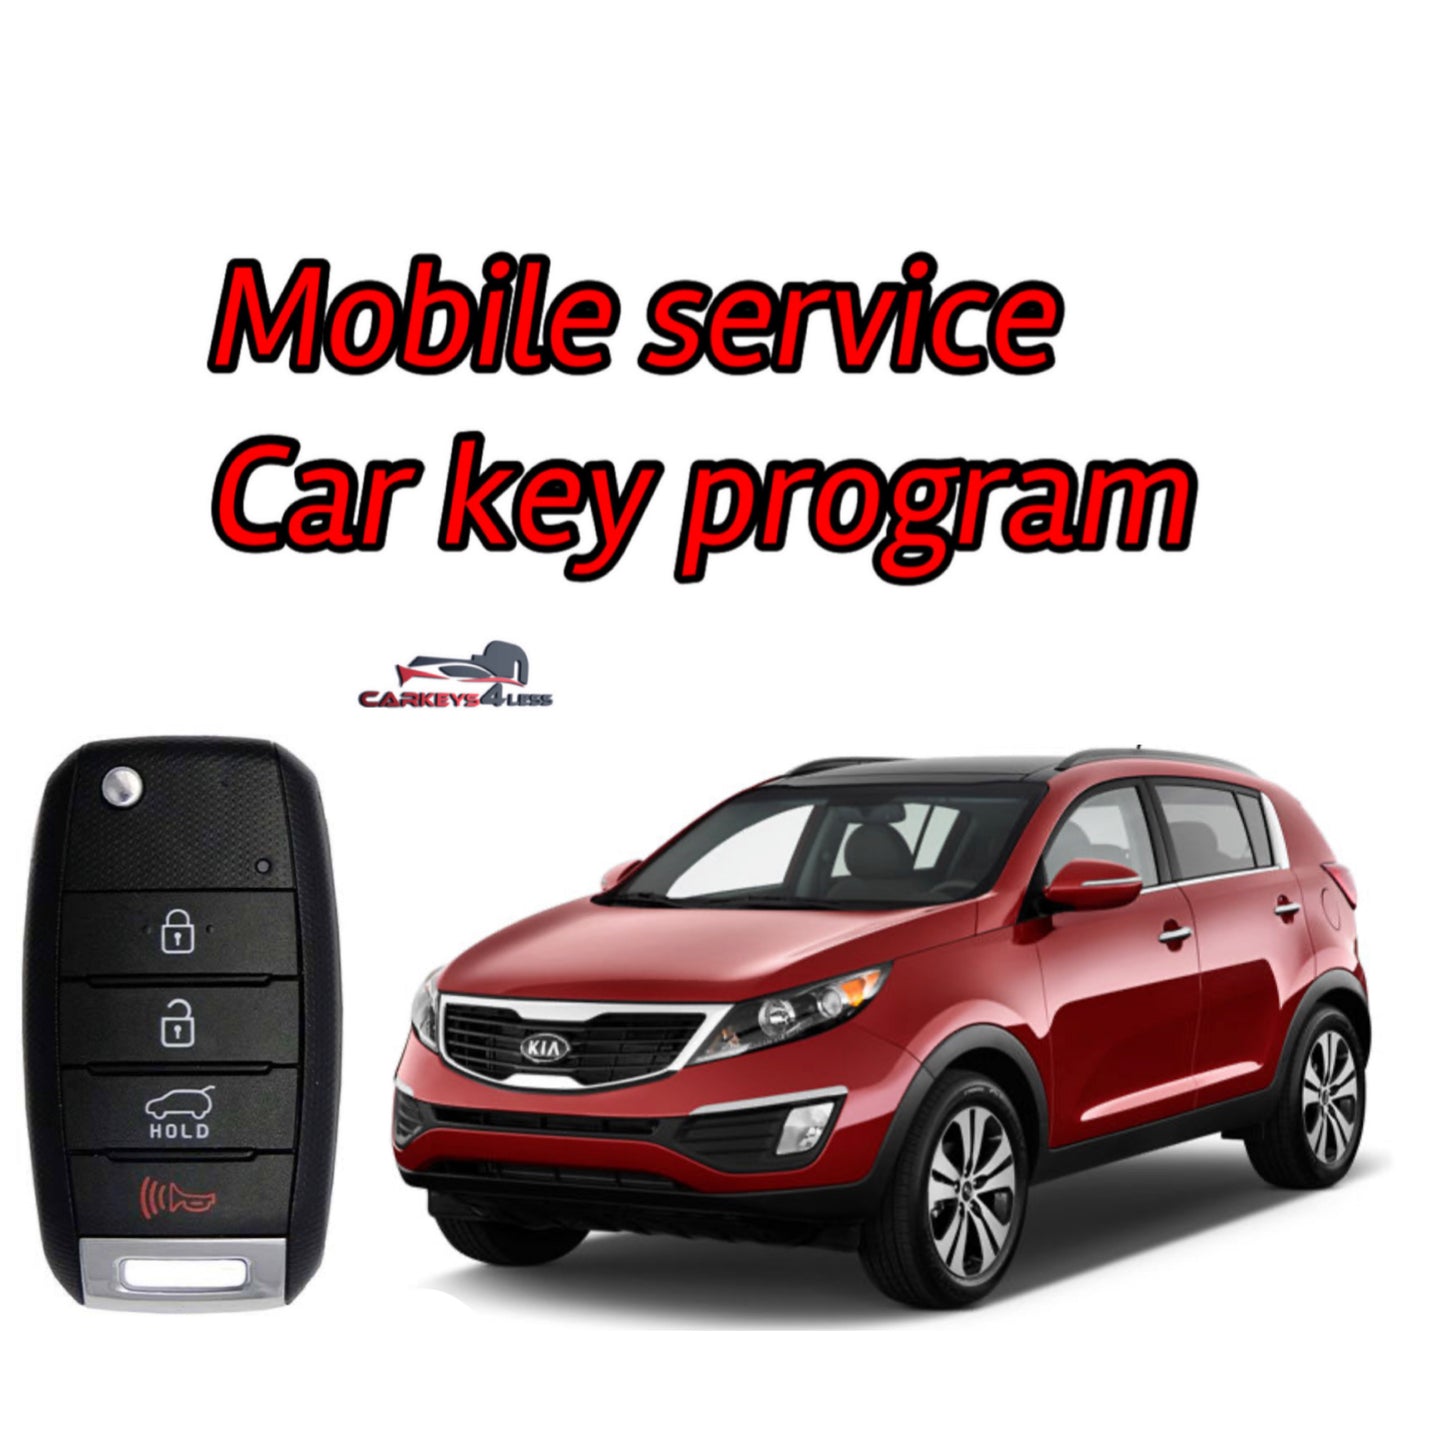 Mobile service for an aftermarket car key replacement for kia